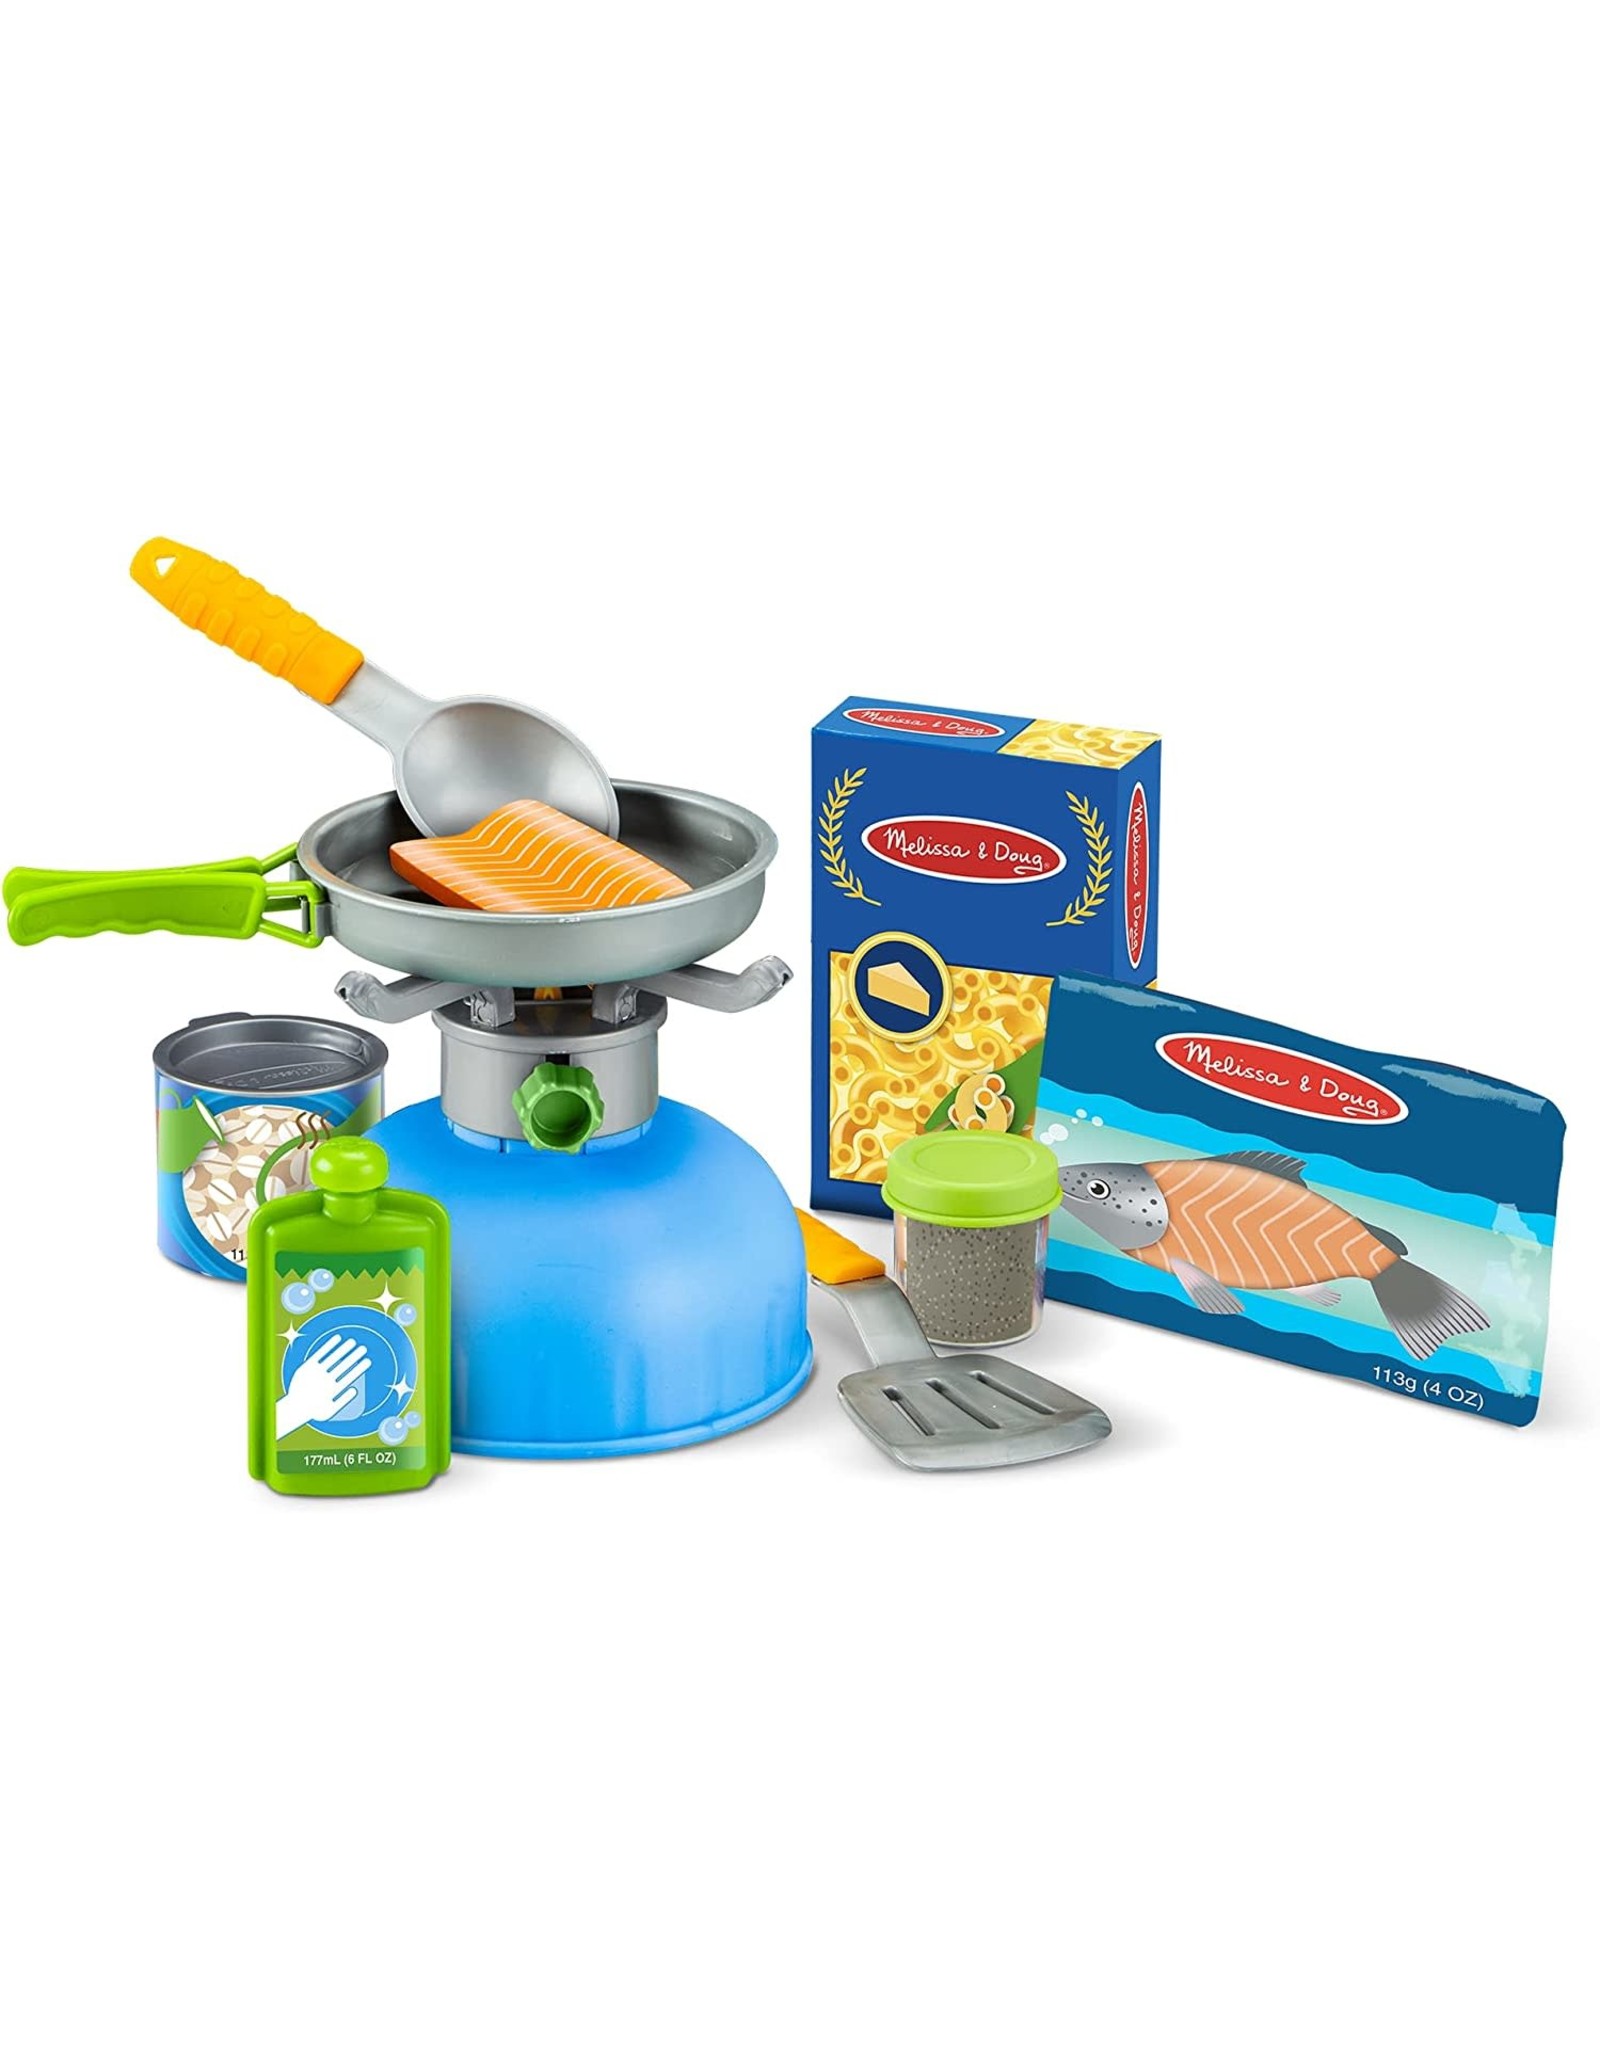 Let's Explore Outdoor Cooking Play Set